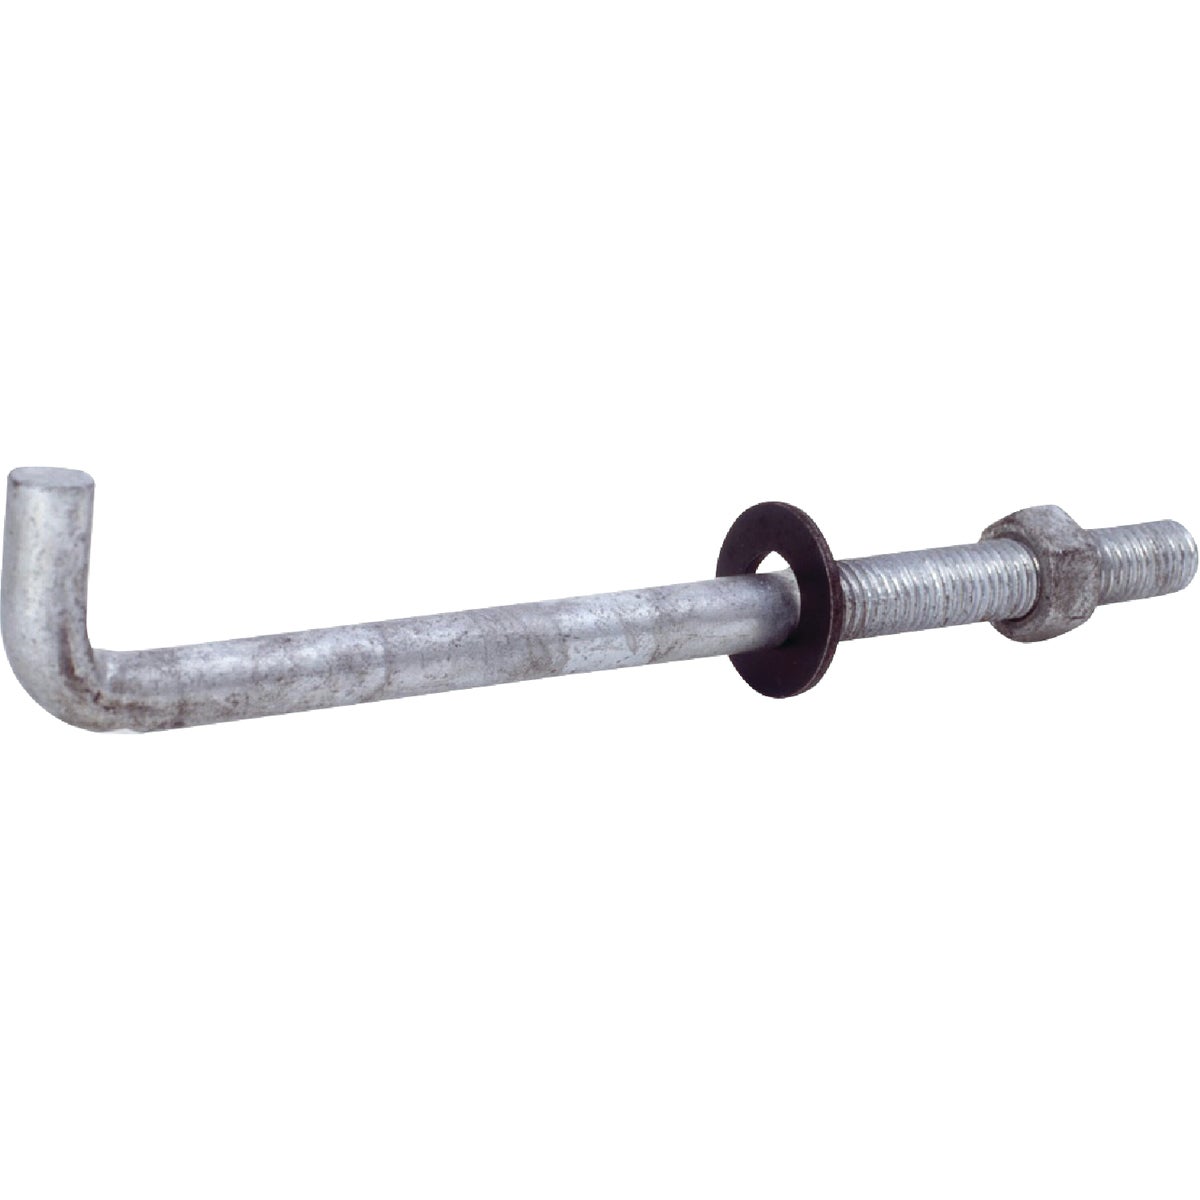 Grip-Rite 1/2 In. x 10 In. Bright Anchor Bolt with Round Washer (50 Ct.)